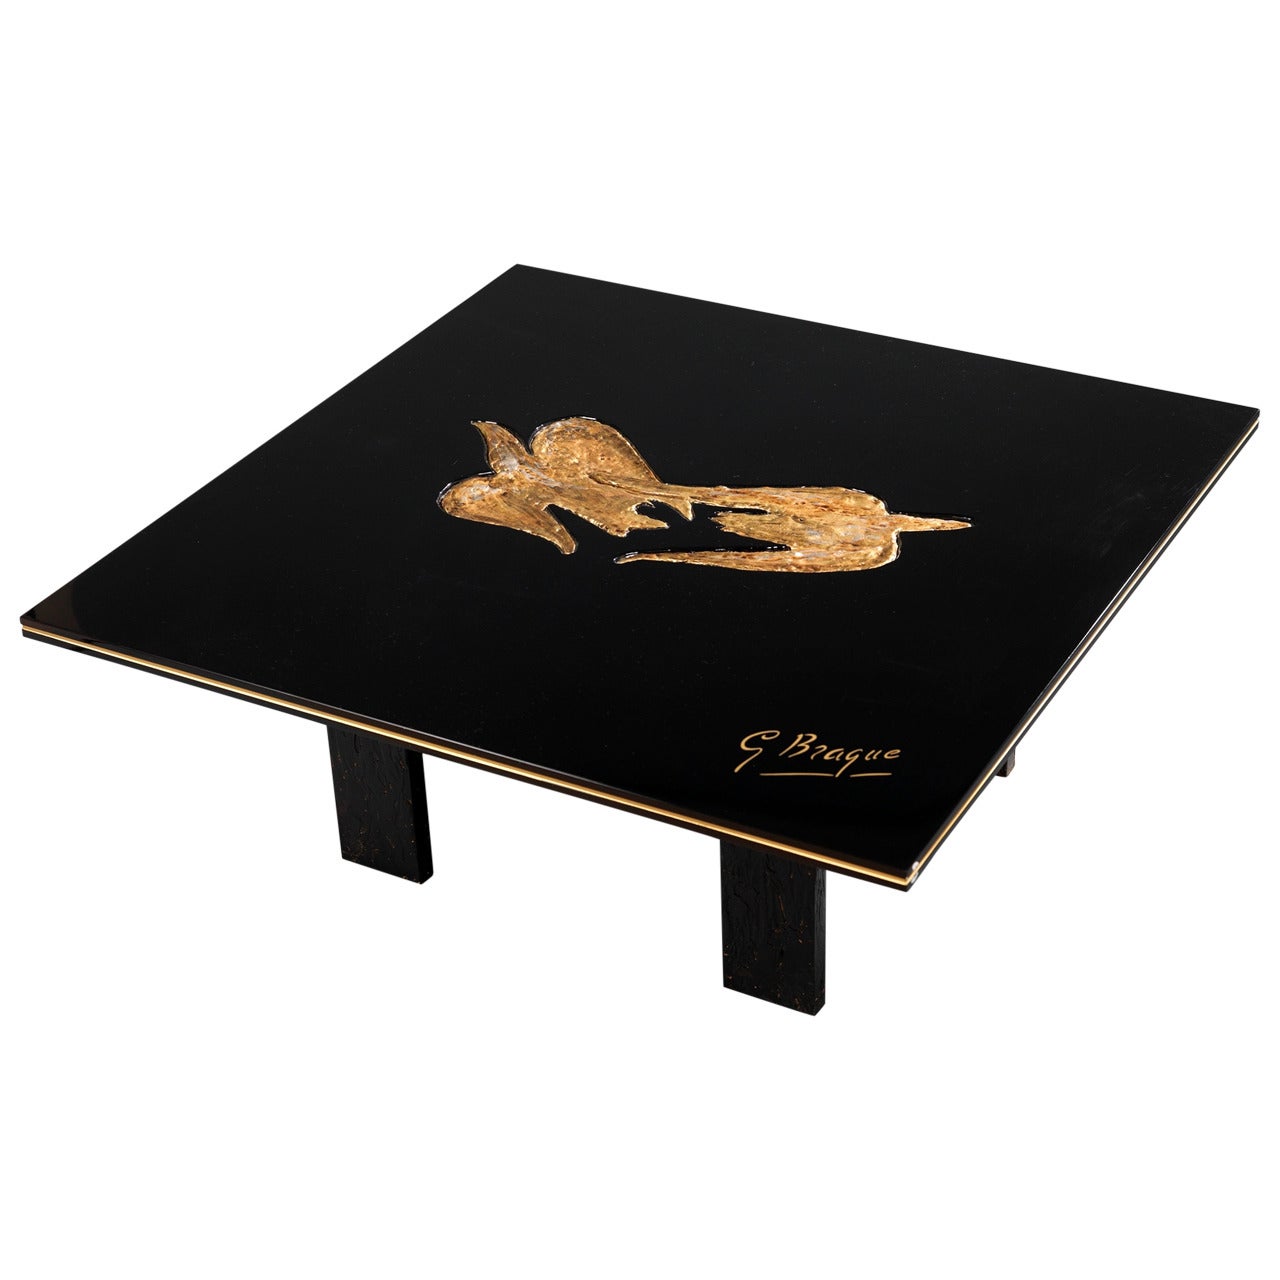 After Georges Braque Limited Edition - Coffee Table, "Zétès et Calais"